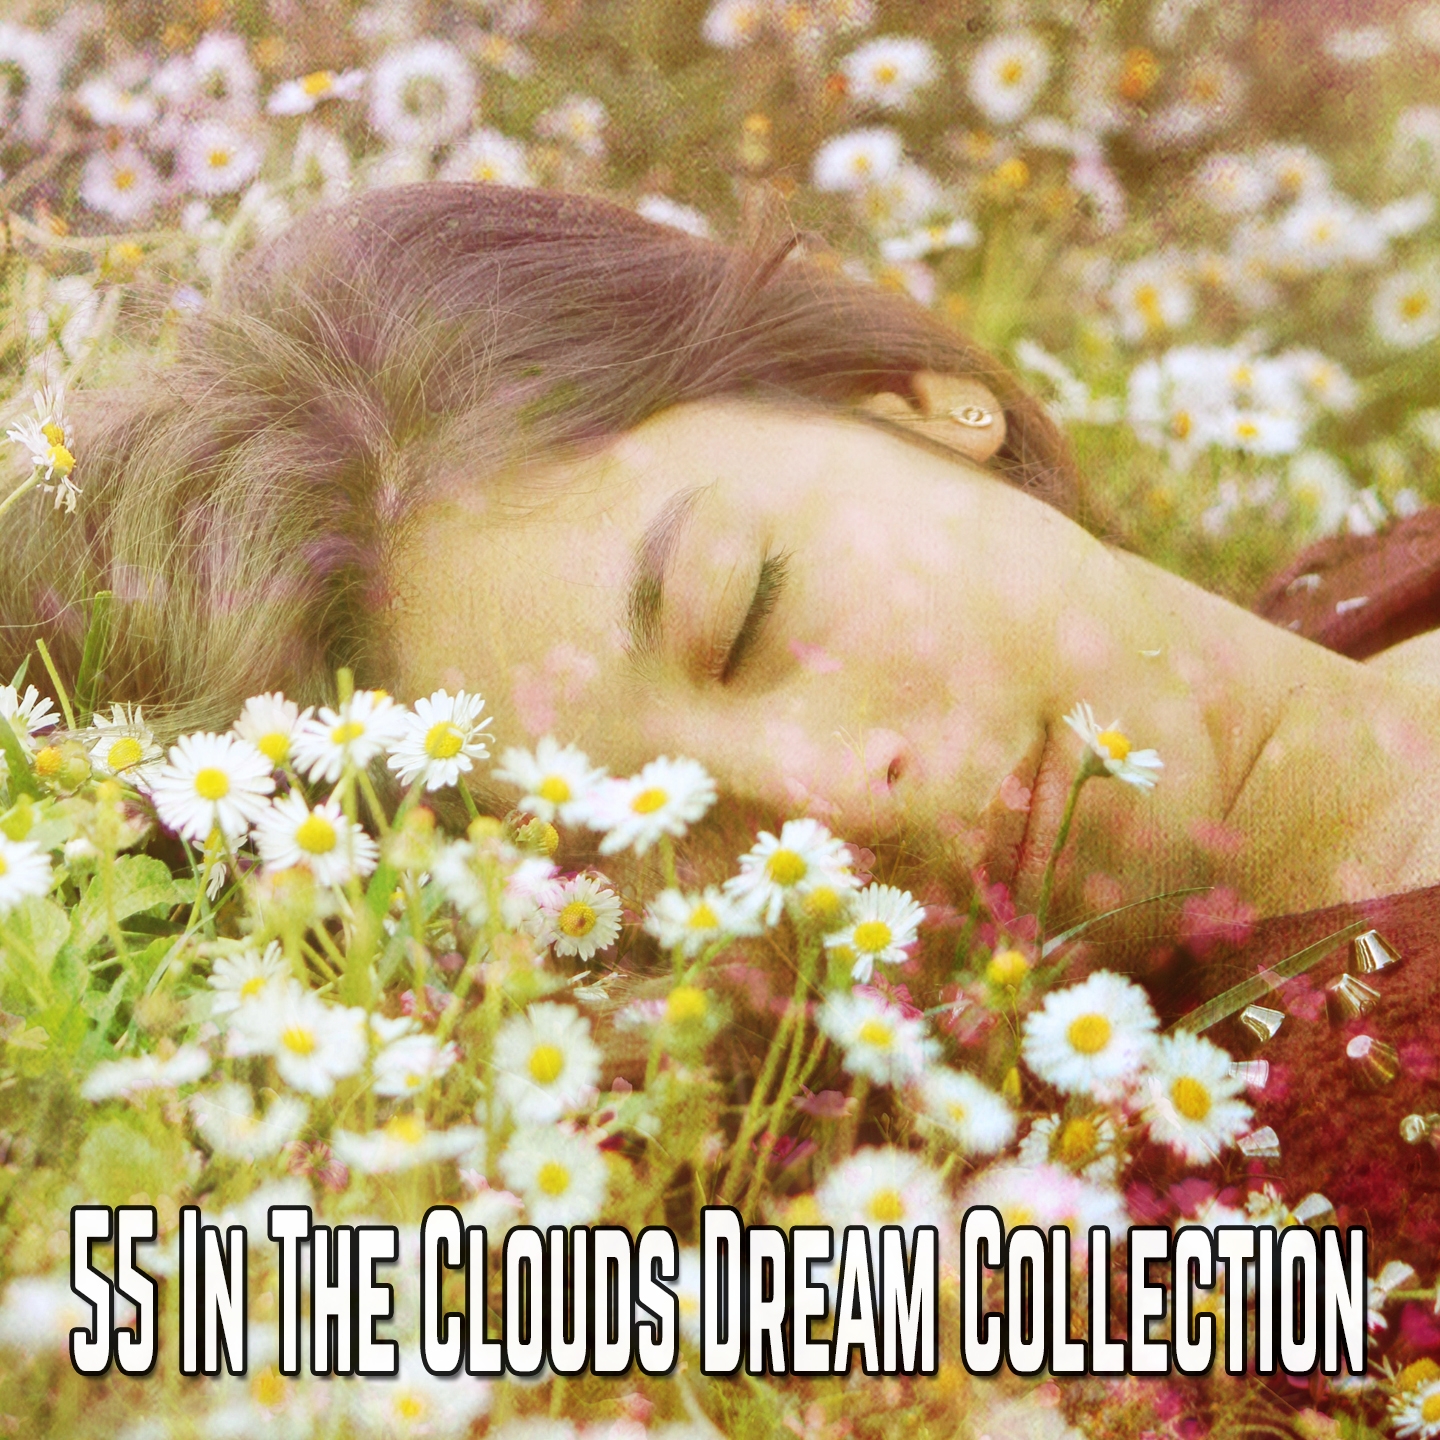 55 In The Clouds Dream Collection